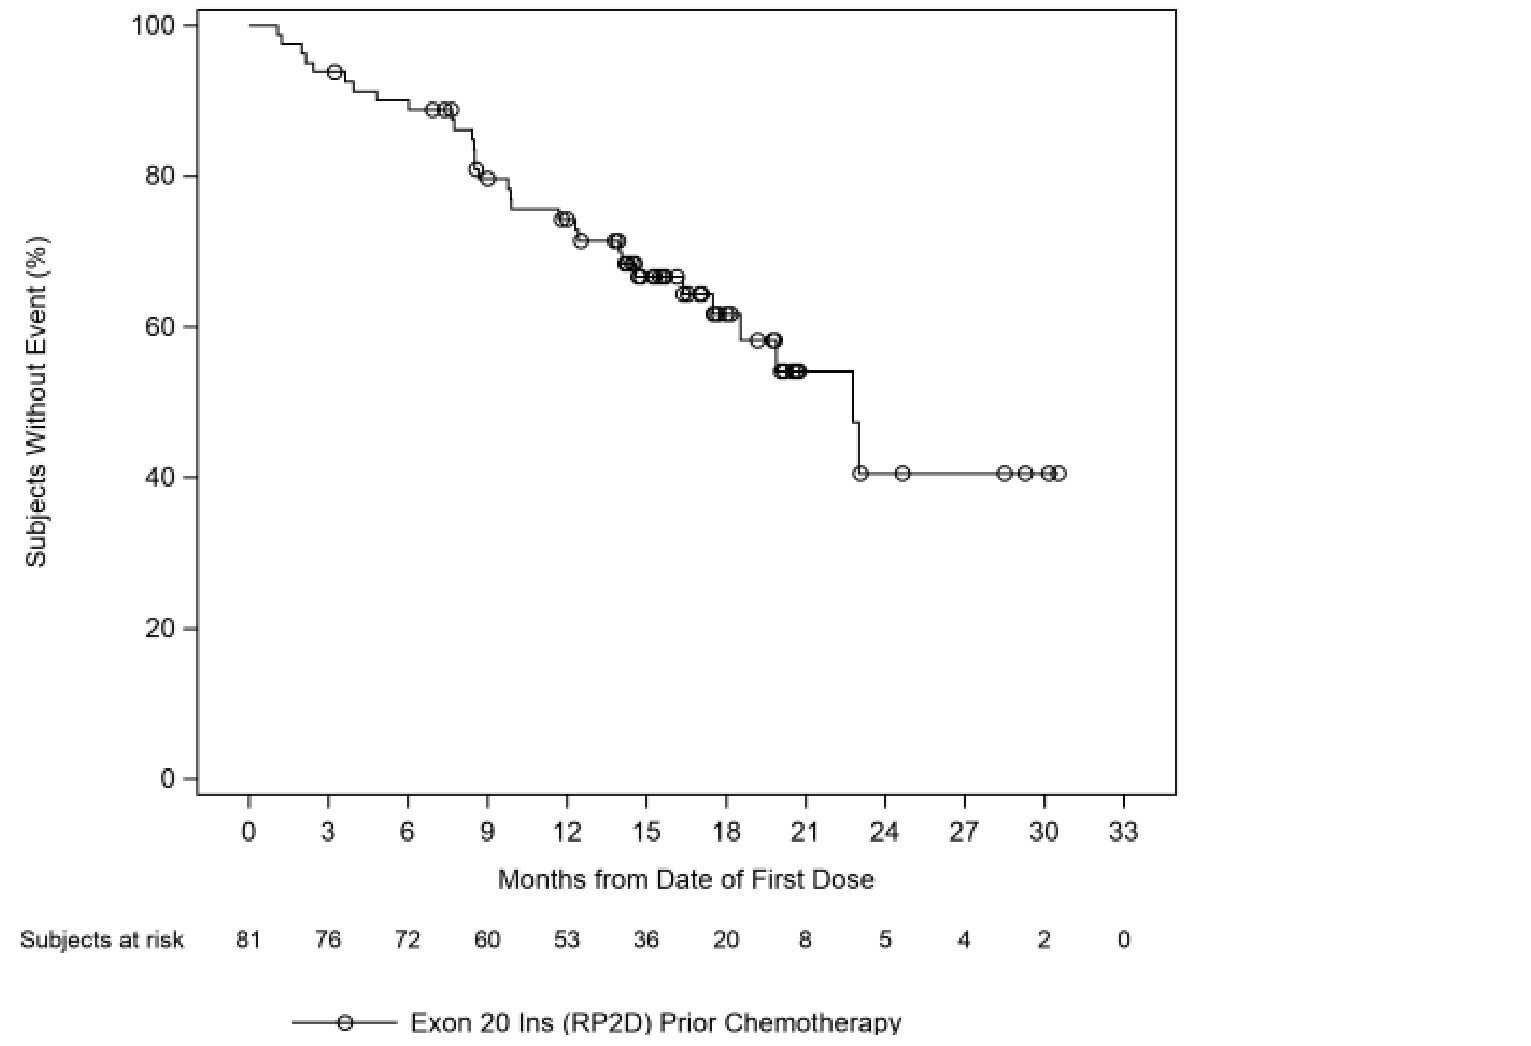 Kaplan-Meier plot of OS in the primary efficacy population (N = 81) per investigator assessment. The median OS was estimated at 22.77 months (17.48 to Not Estimable).